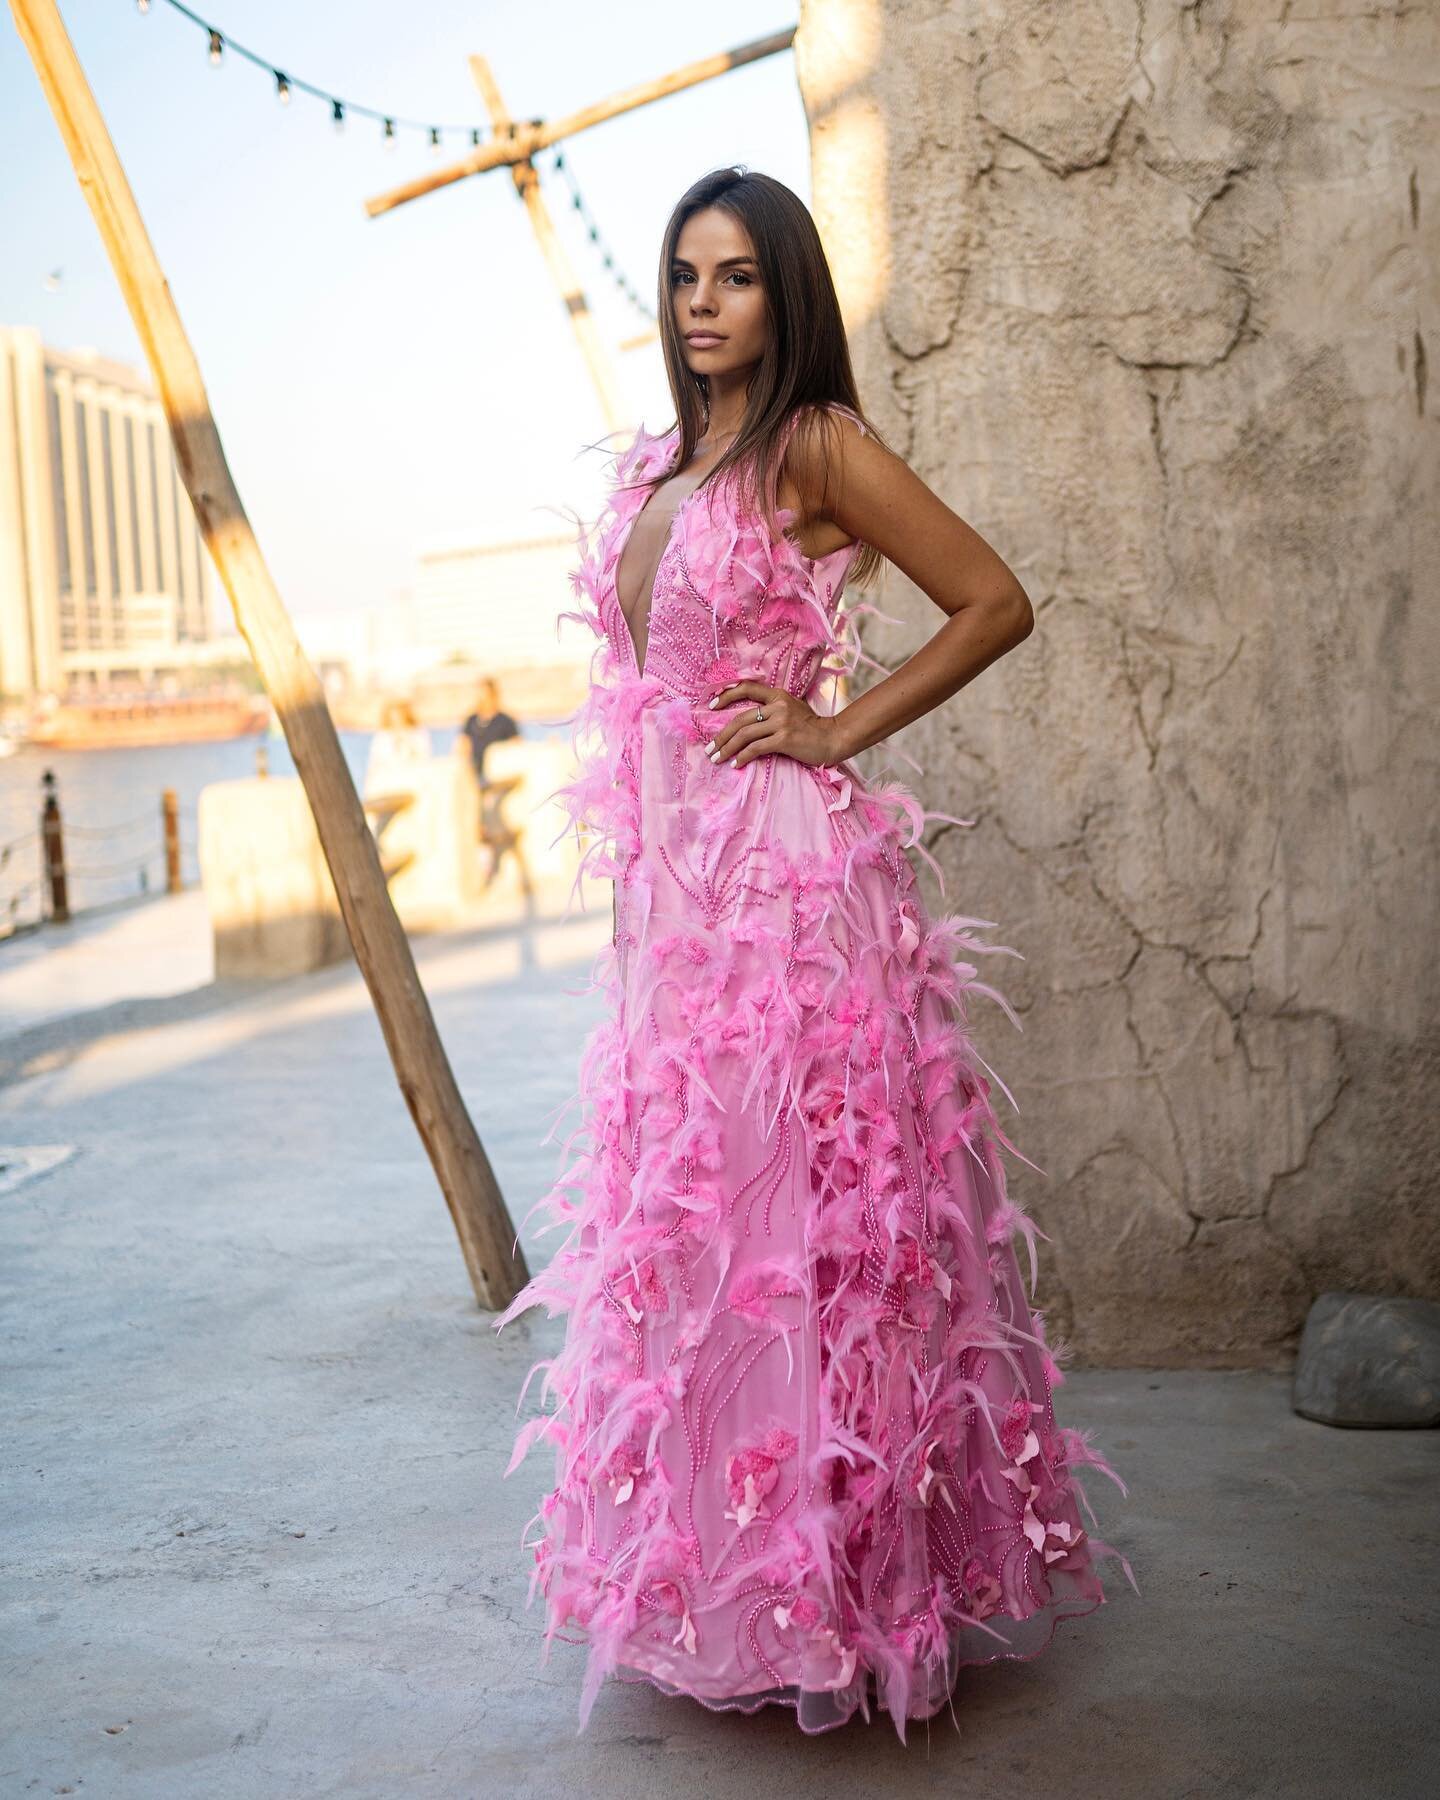 Look 5/10 Fully Beaded Feathers Pink Gown

Photography: @bite_of_time_pro 
Model: @krismixaaa